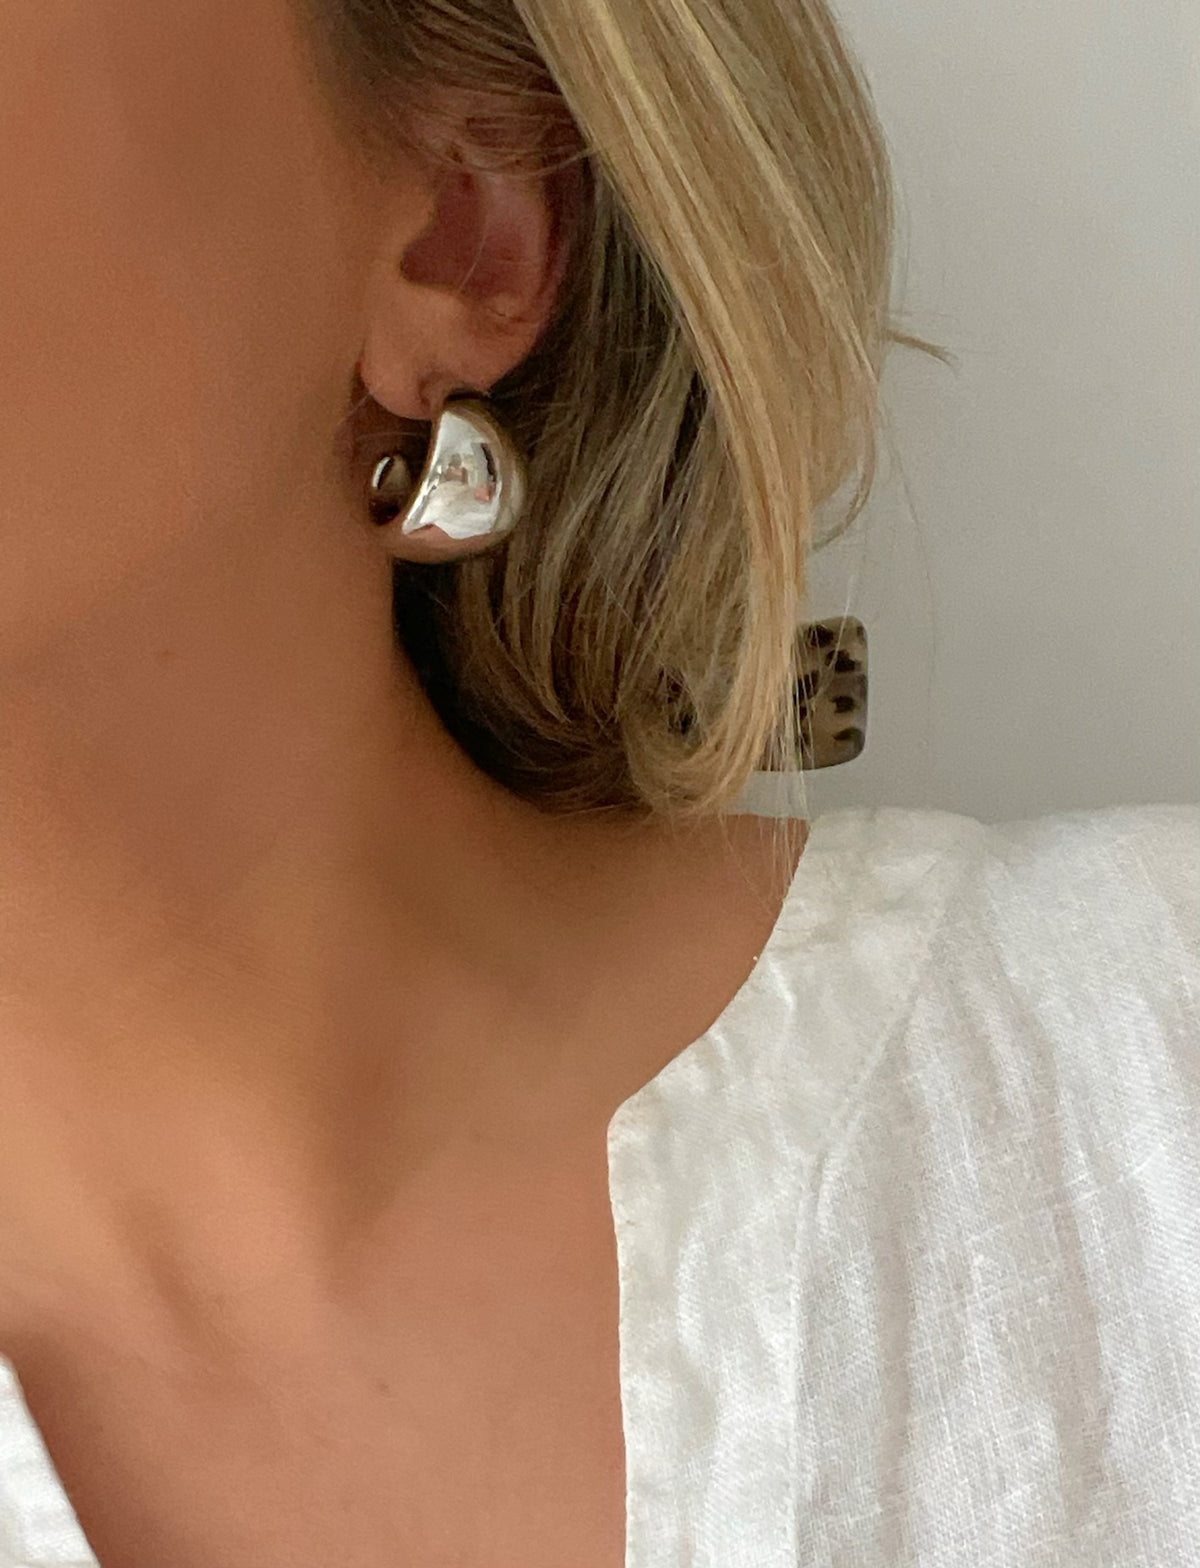 Elegant Thick Dome Hoop Earrings by Dylan Rae Jewelry, available in gold and silver, showcasing their bold yet timeless design.